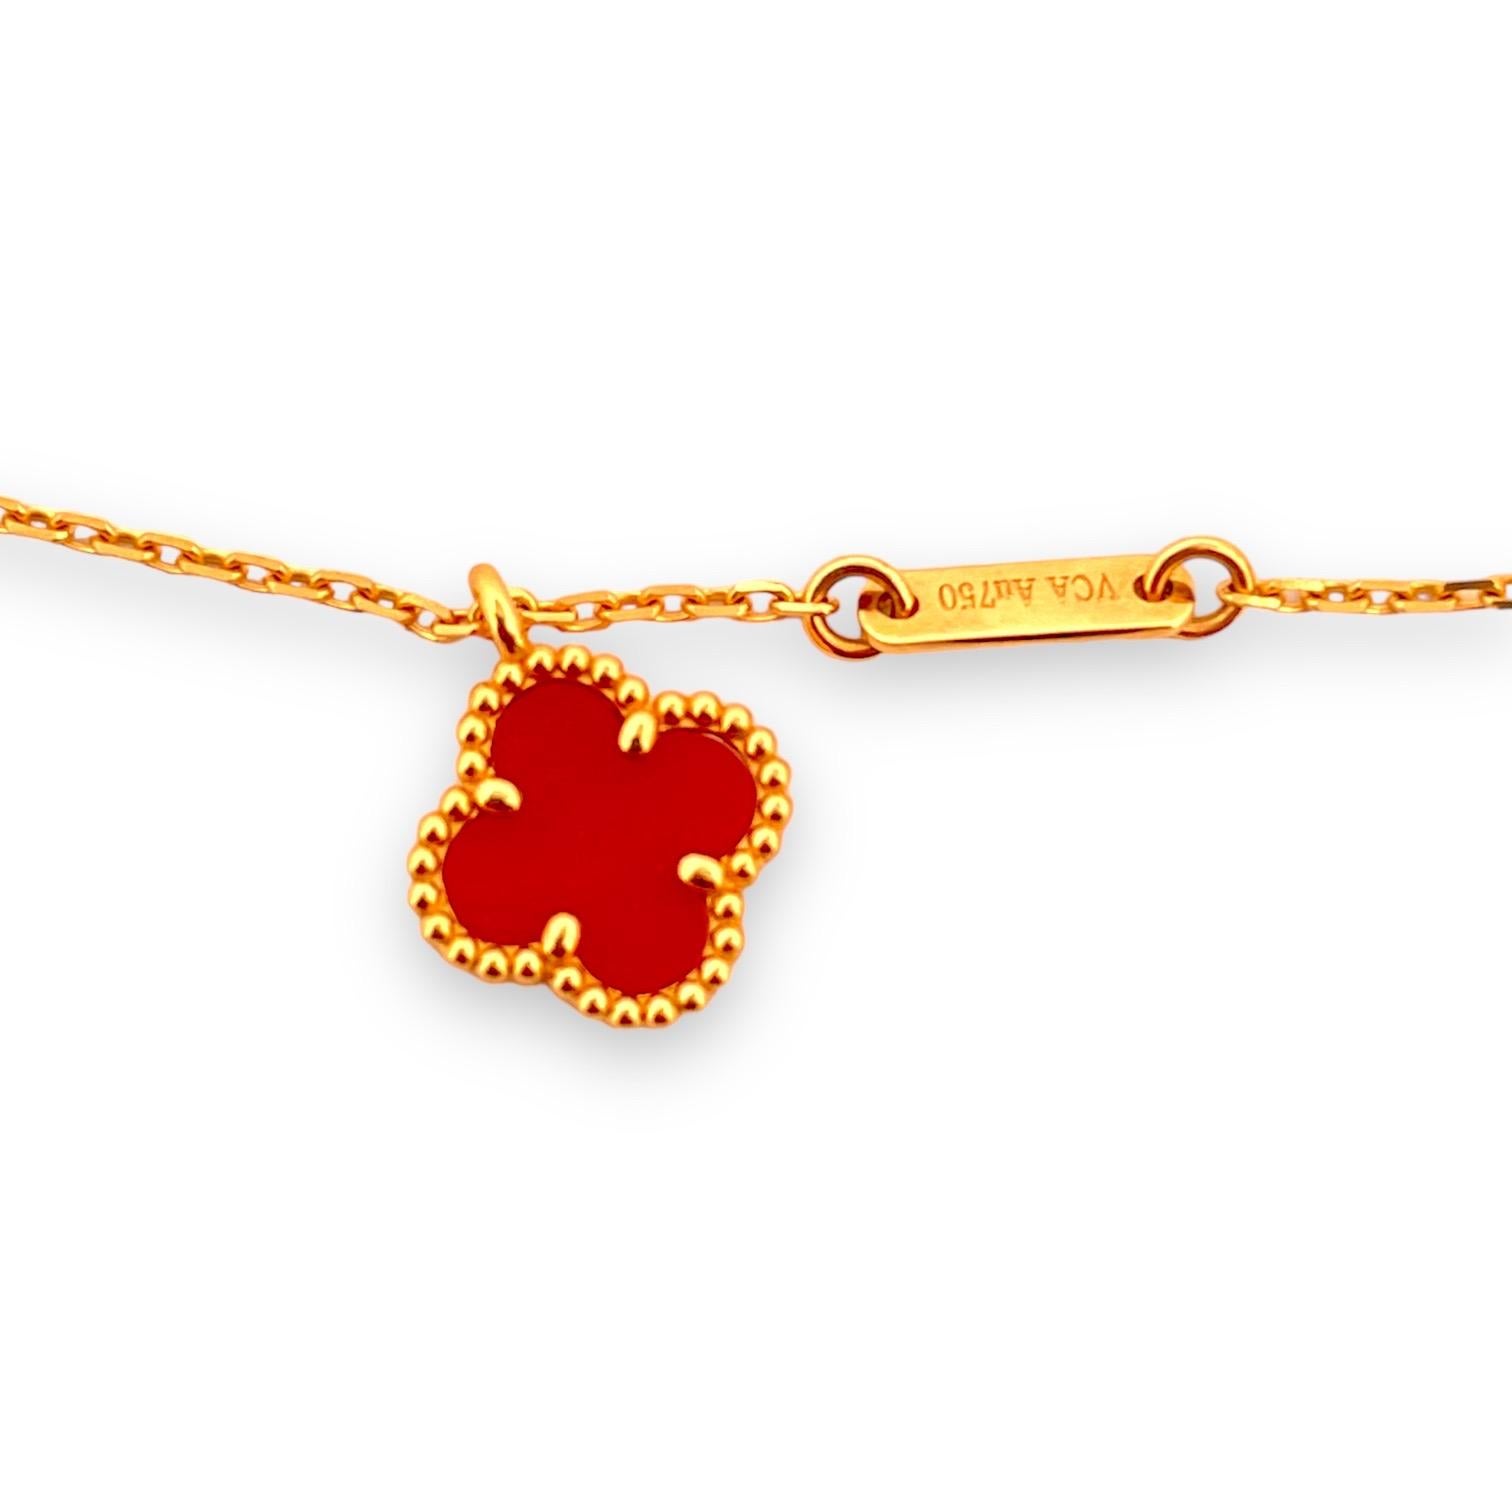 Embrace the symbol of luck and luxury with our 'Golden Charm' pendant, an exquisite piece from Van Cleef & Arpels' Sweet Alhambra collection. Meticulously crafted in 18k yellow gold, this pendant features a rich carnelian clover that exudes warmth